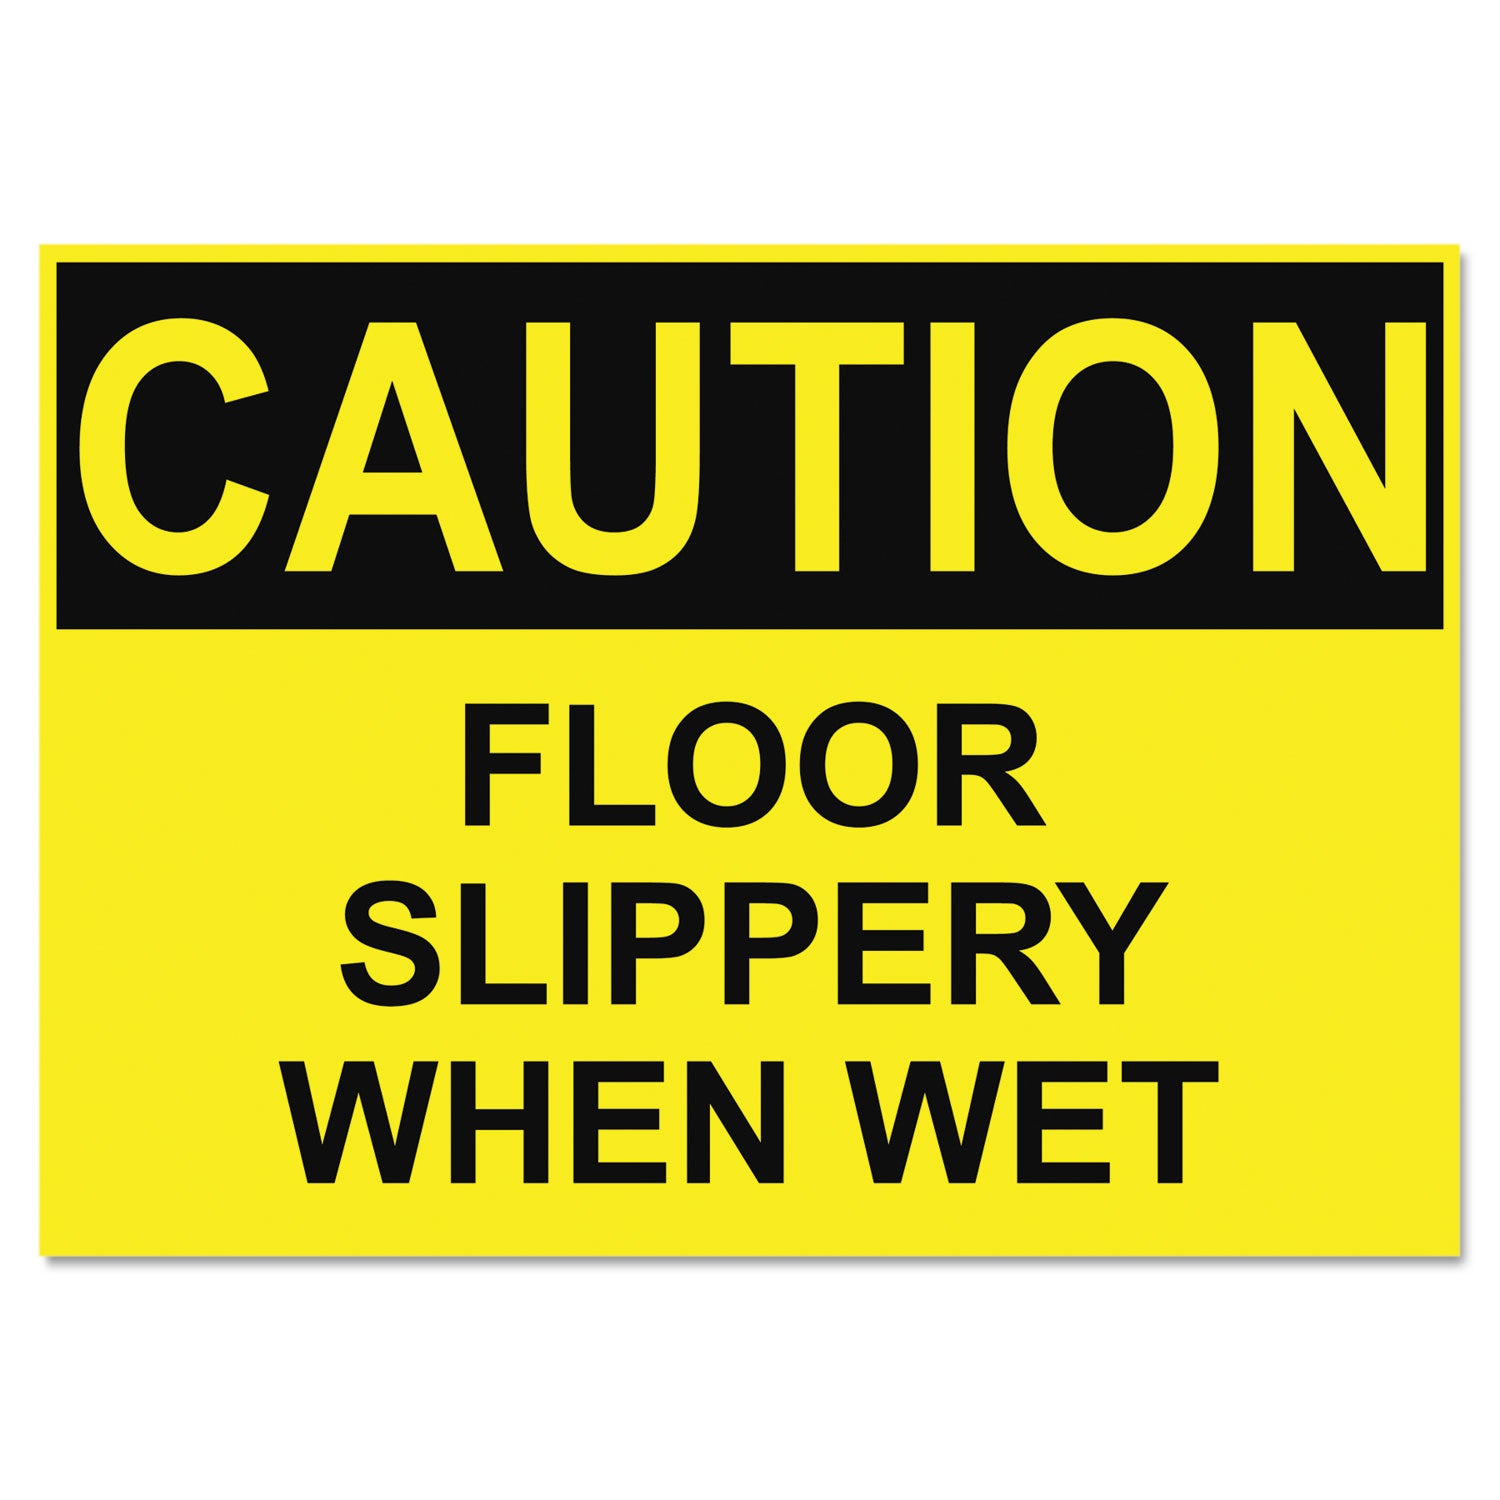 osha-safety-signs-caution-slippery-when-wet-yellow-black-10-x-14_uss5494 - 1